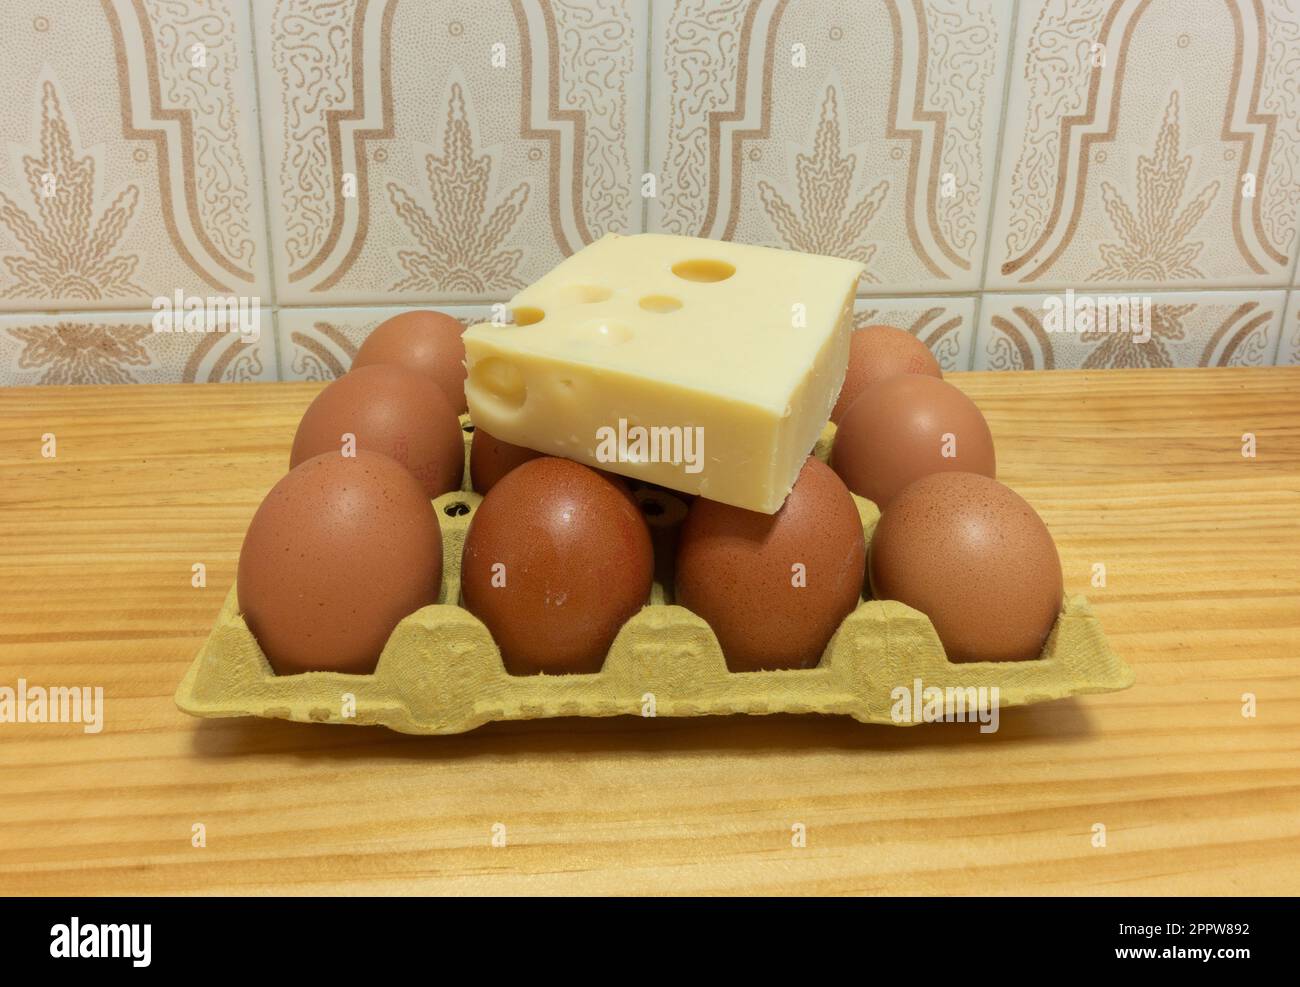 Emmental cheese and eggs on kitchen table. Rising food prices, cost of living...UK Stock Photo